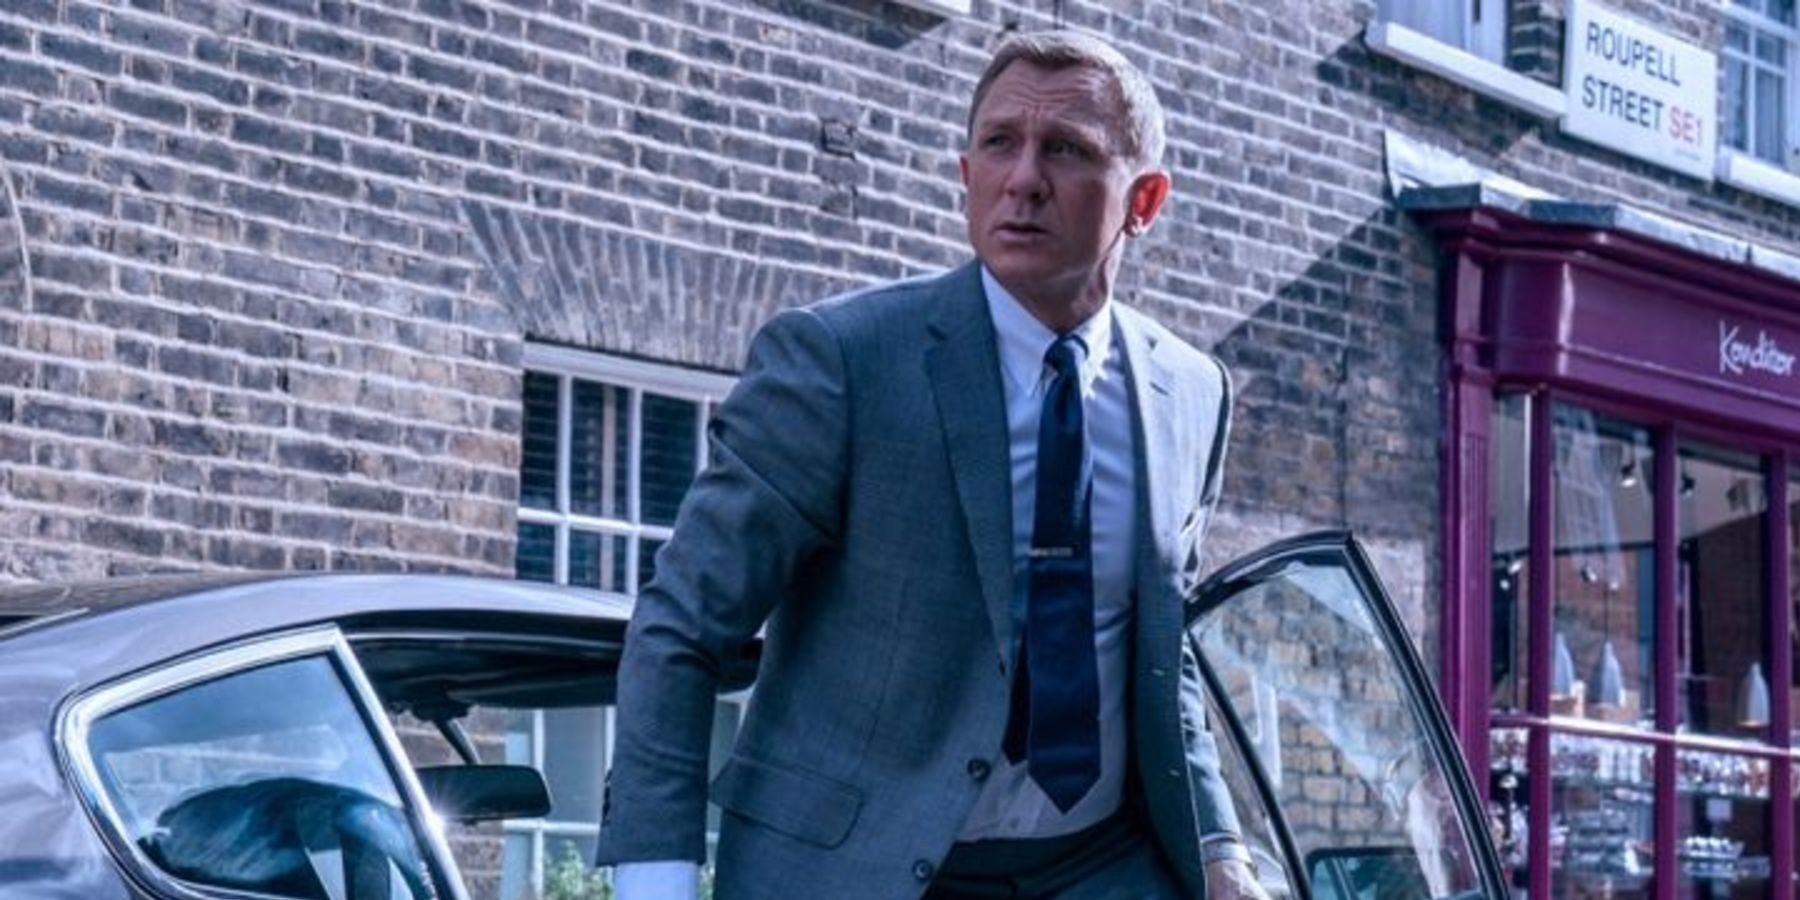 James Bond gets out of a car in No Time to Die.